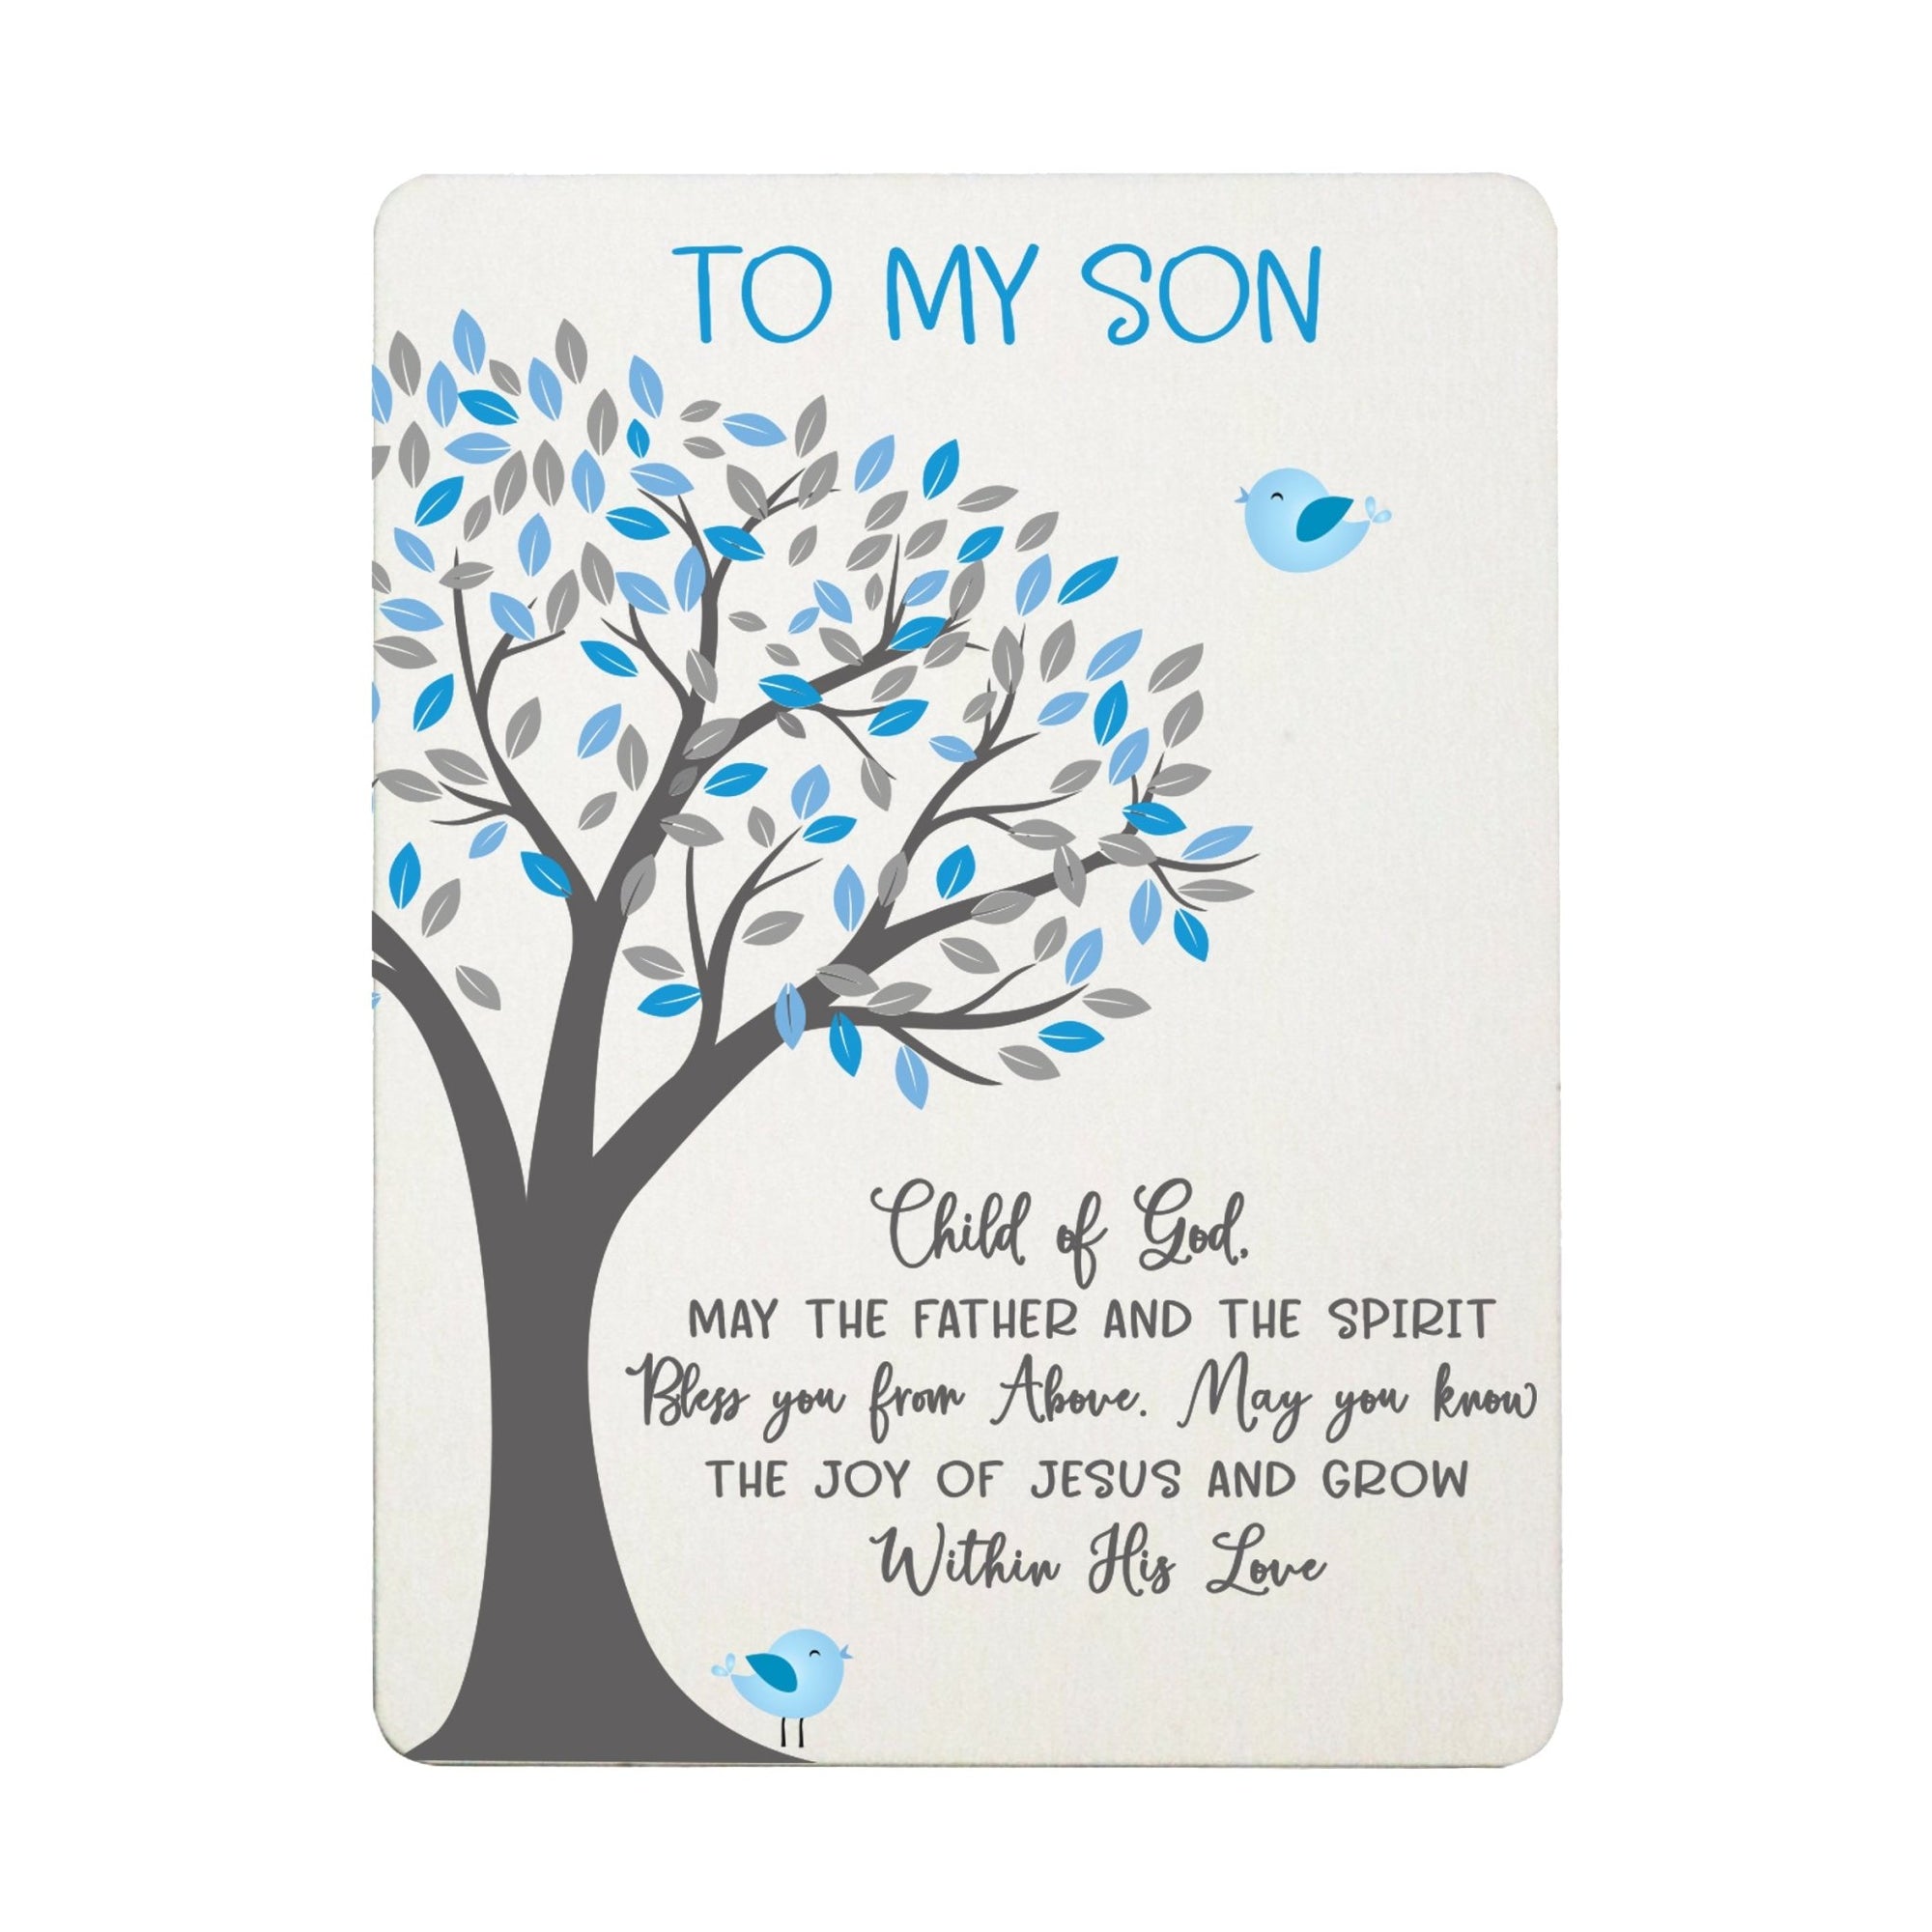 Newborn Baby Scripture Magnet for Fridge - May The Father - LifeSong Milestones